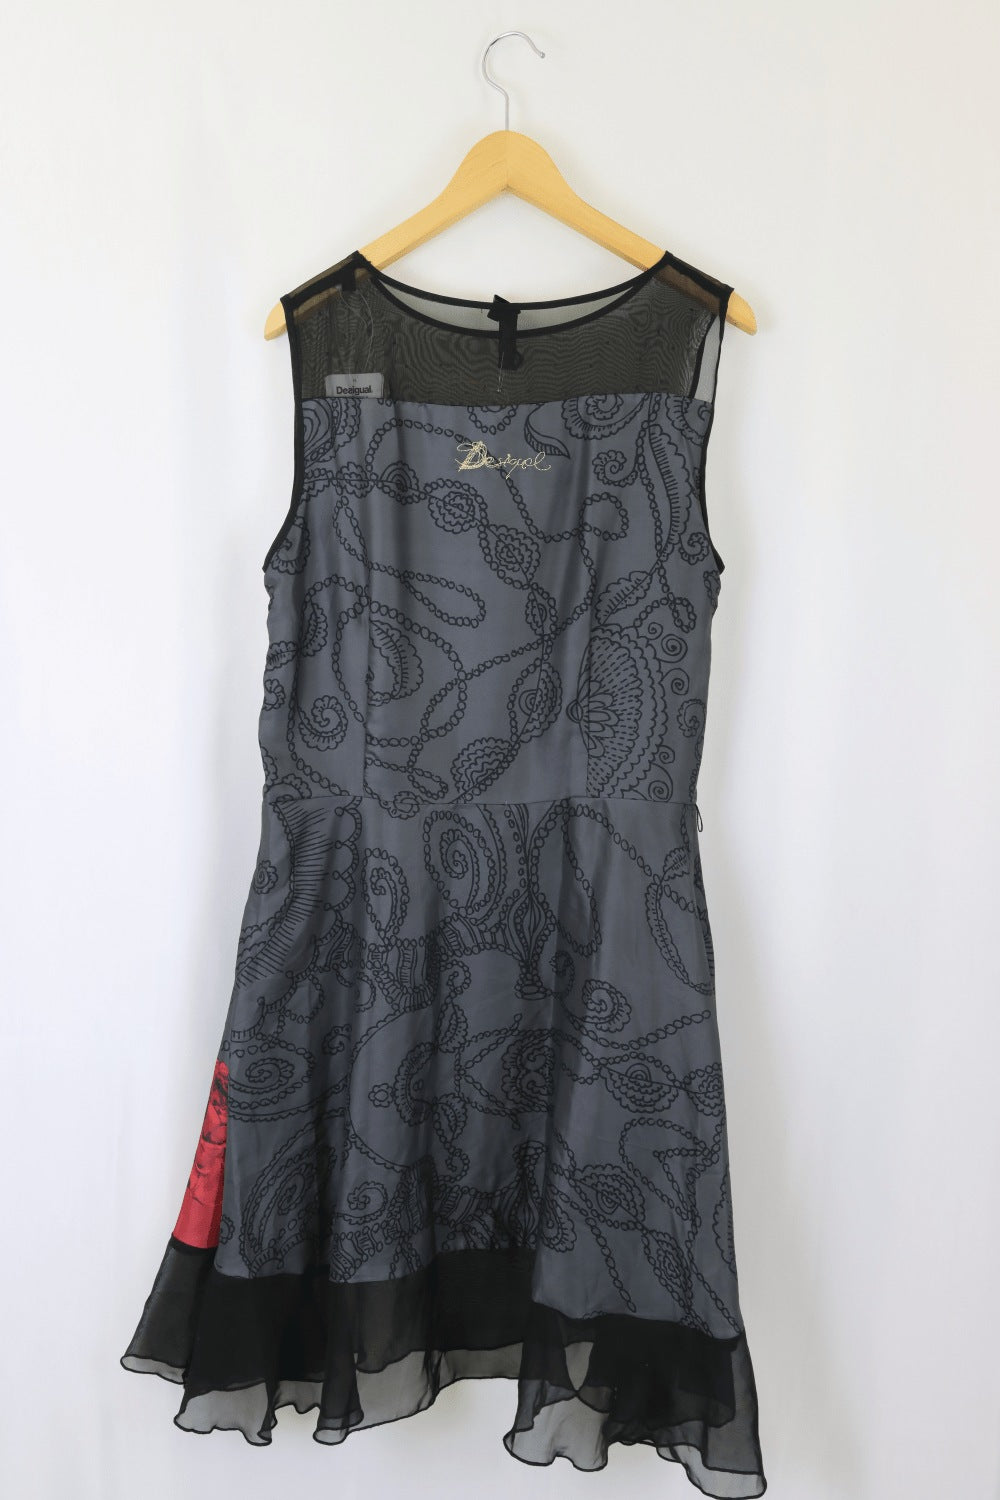 Desigual Grey And Red Dress S